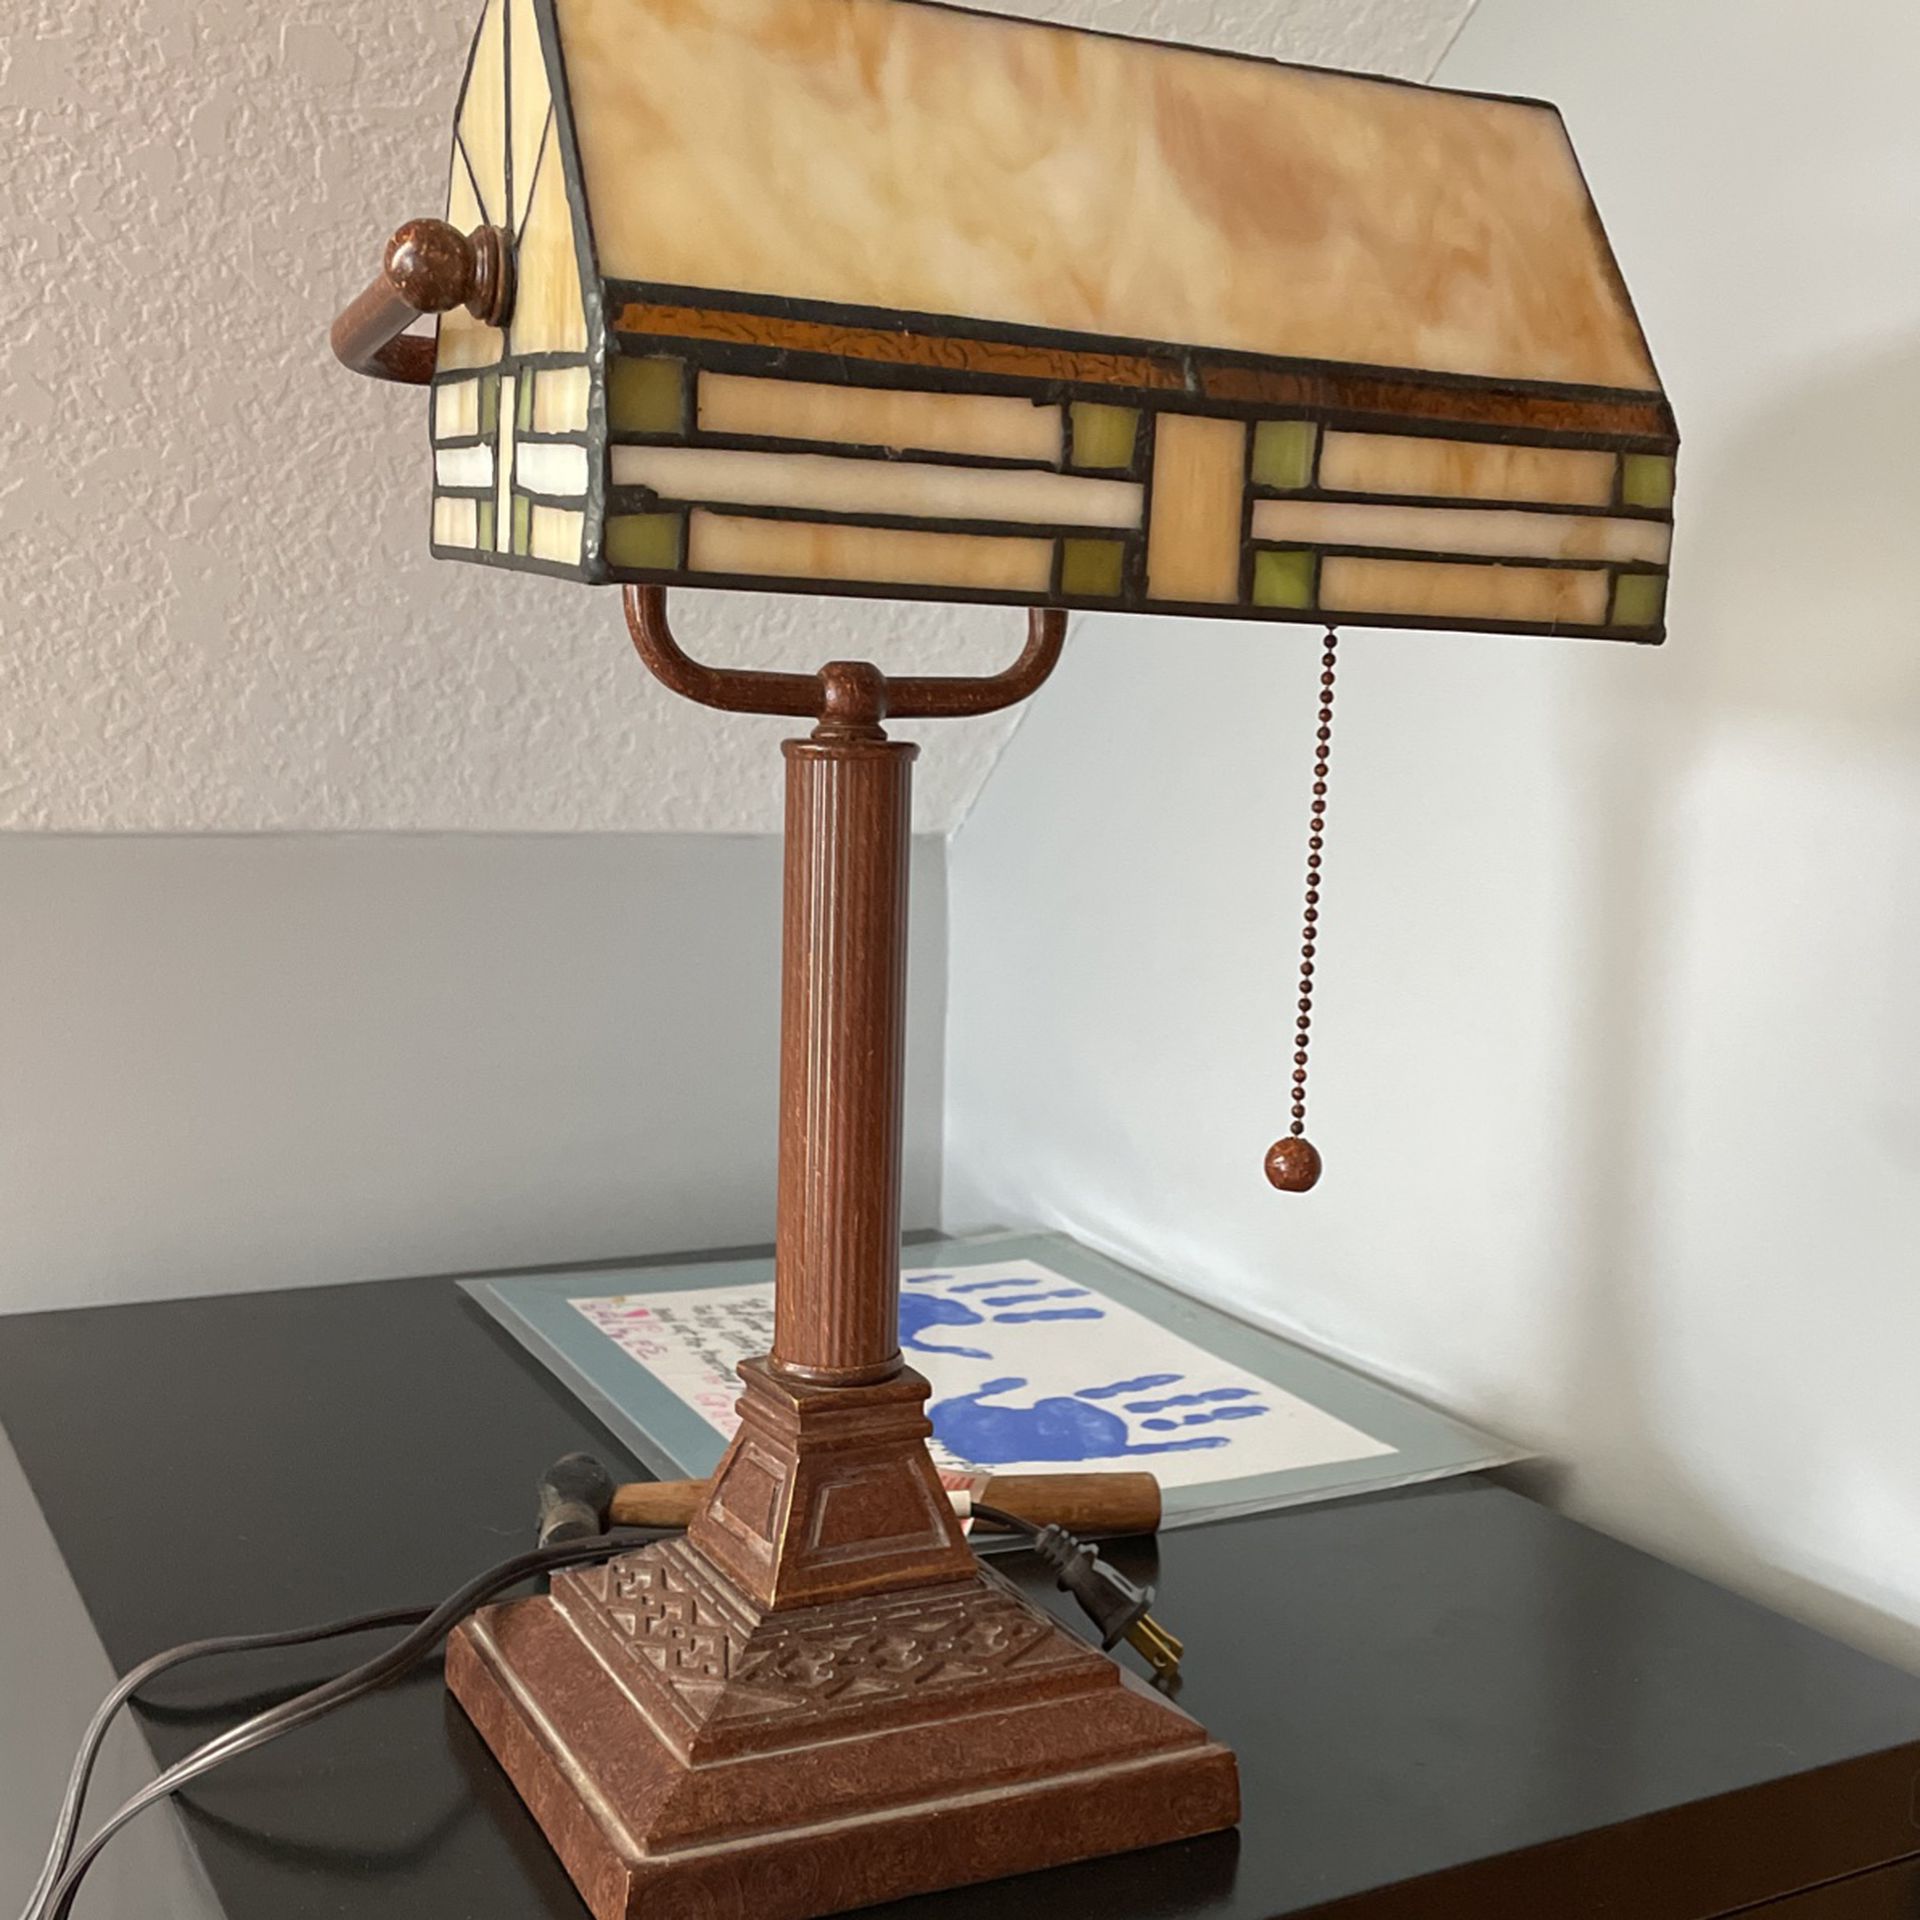 Beautiful stained-glass lamp